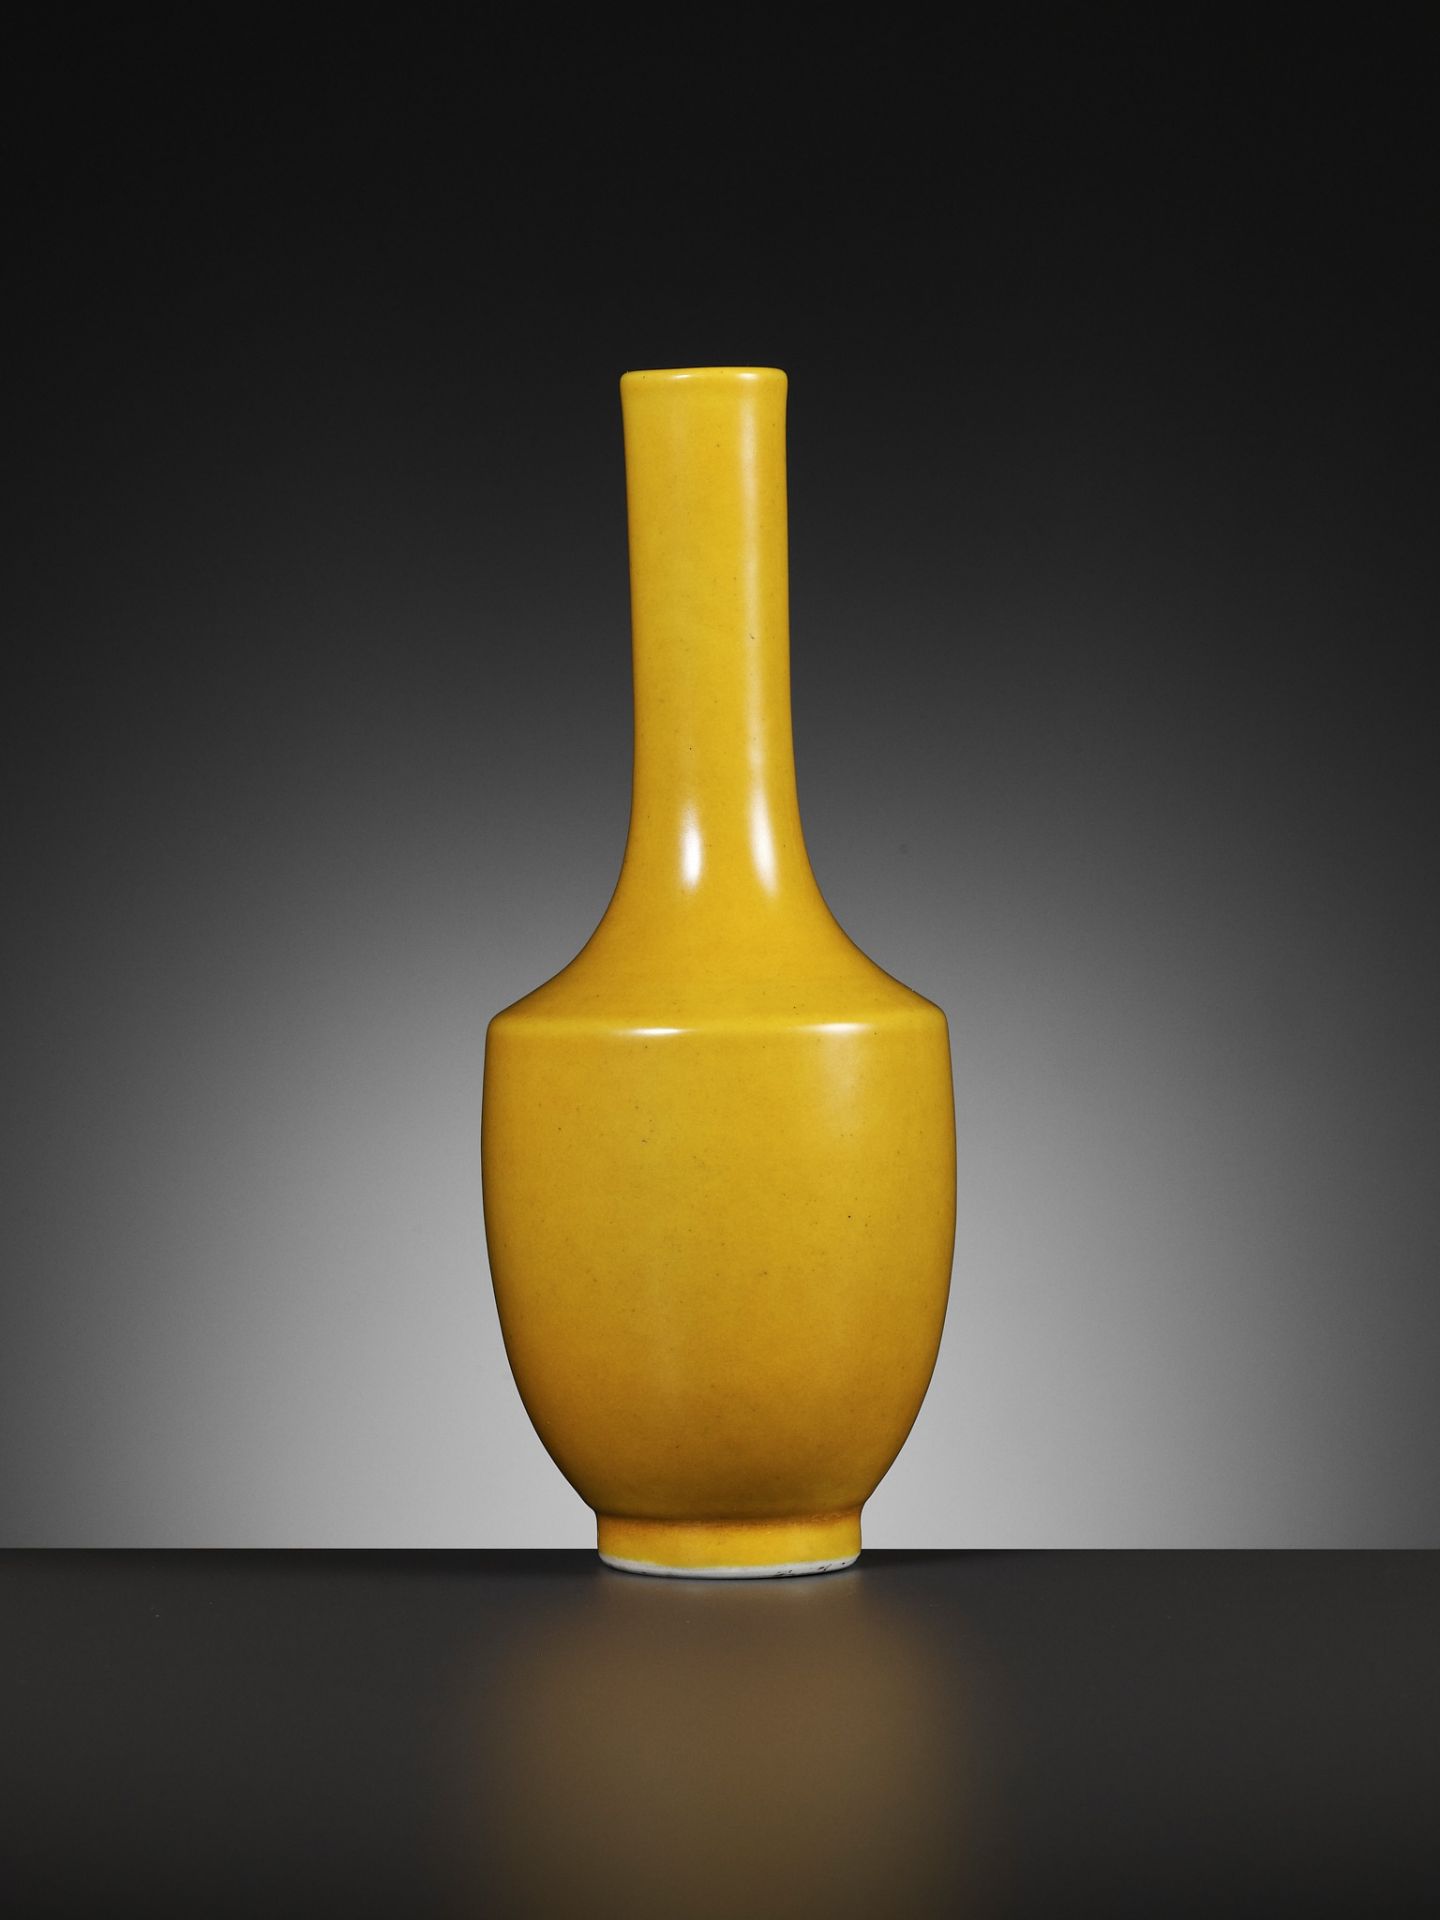 AN IMPERIAL YELLOW-GLAZED MONOCHROME MALLET VASE, YONGZHENG MARK, QING DYNASTY - Image 9 of 9